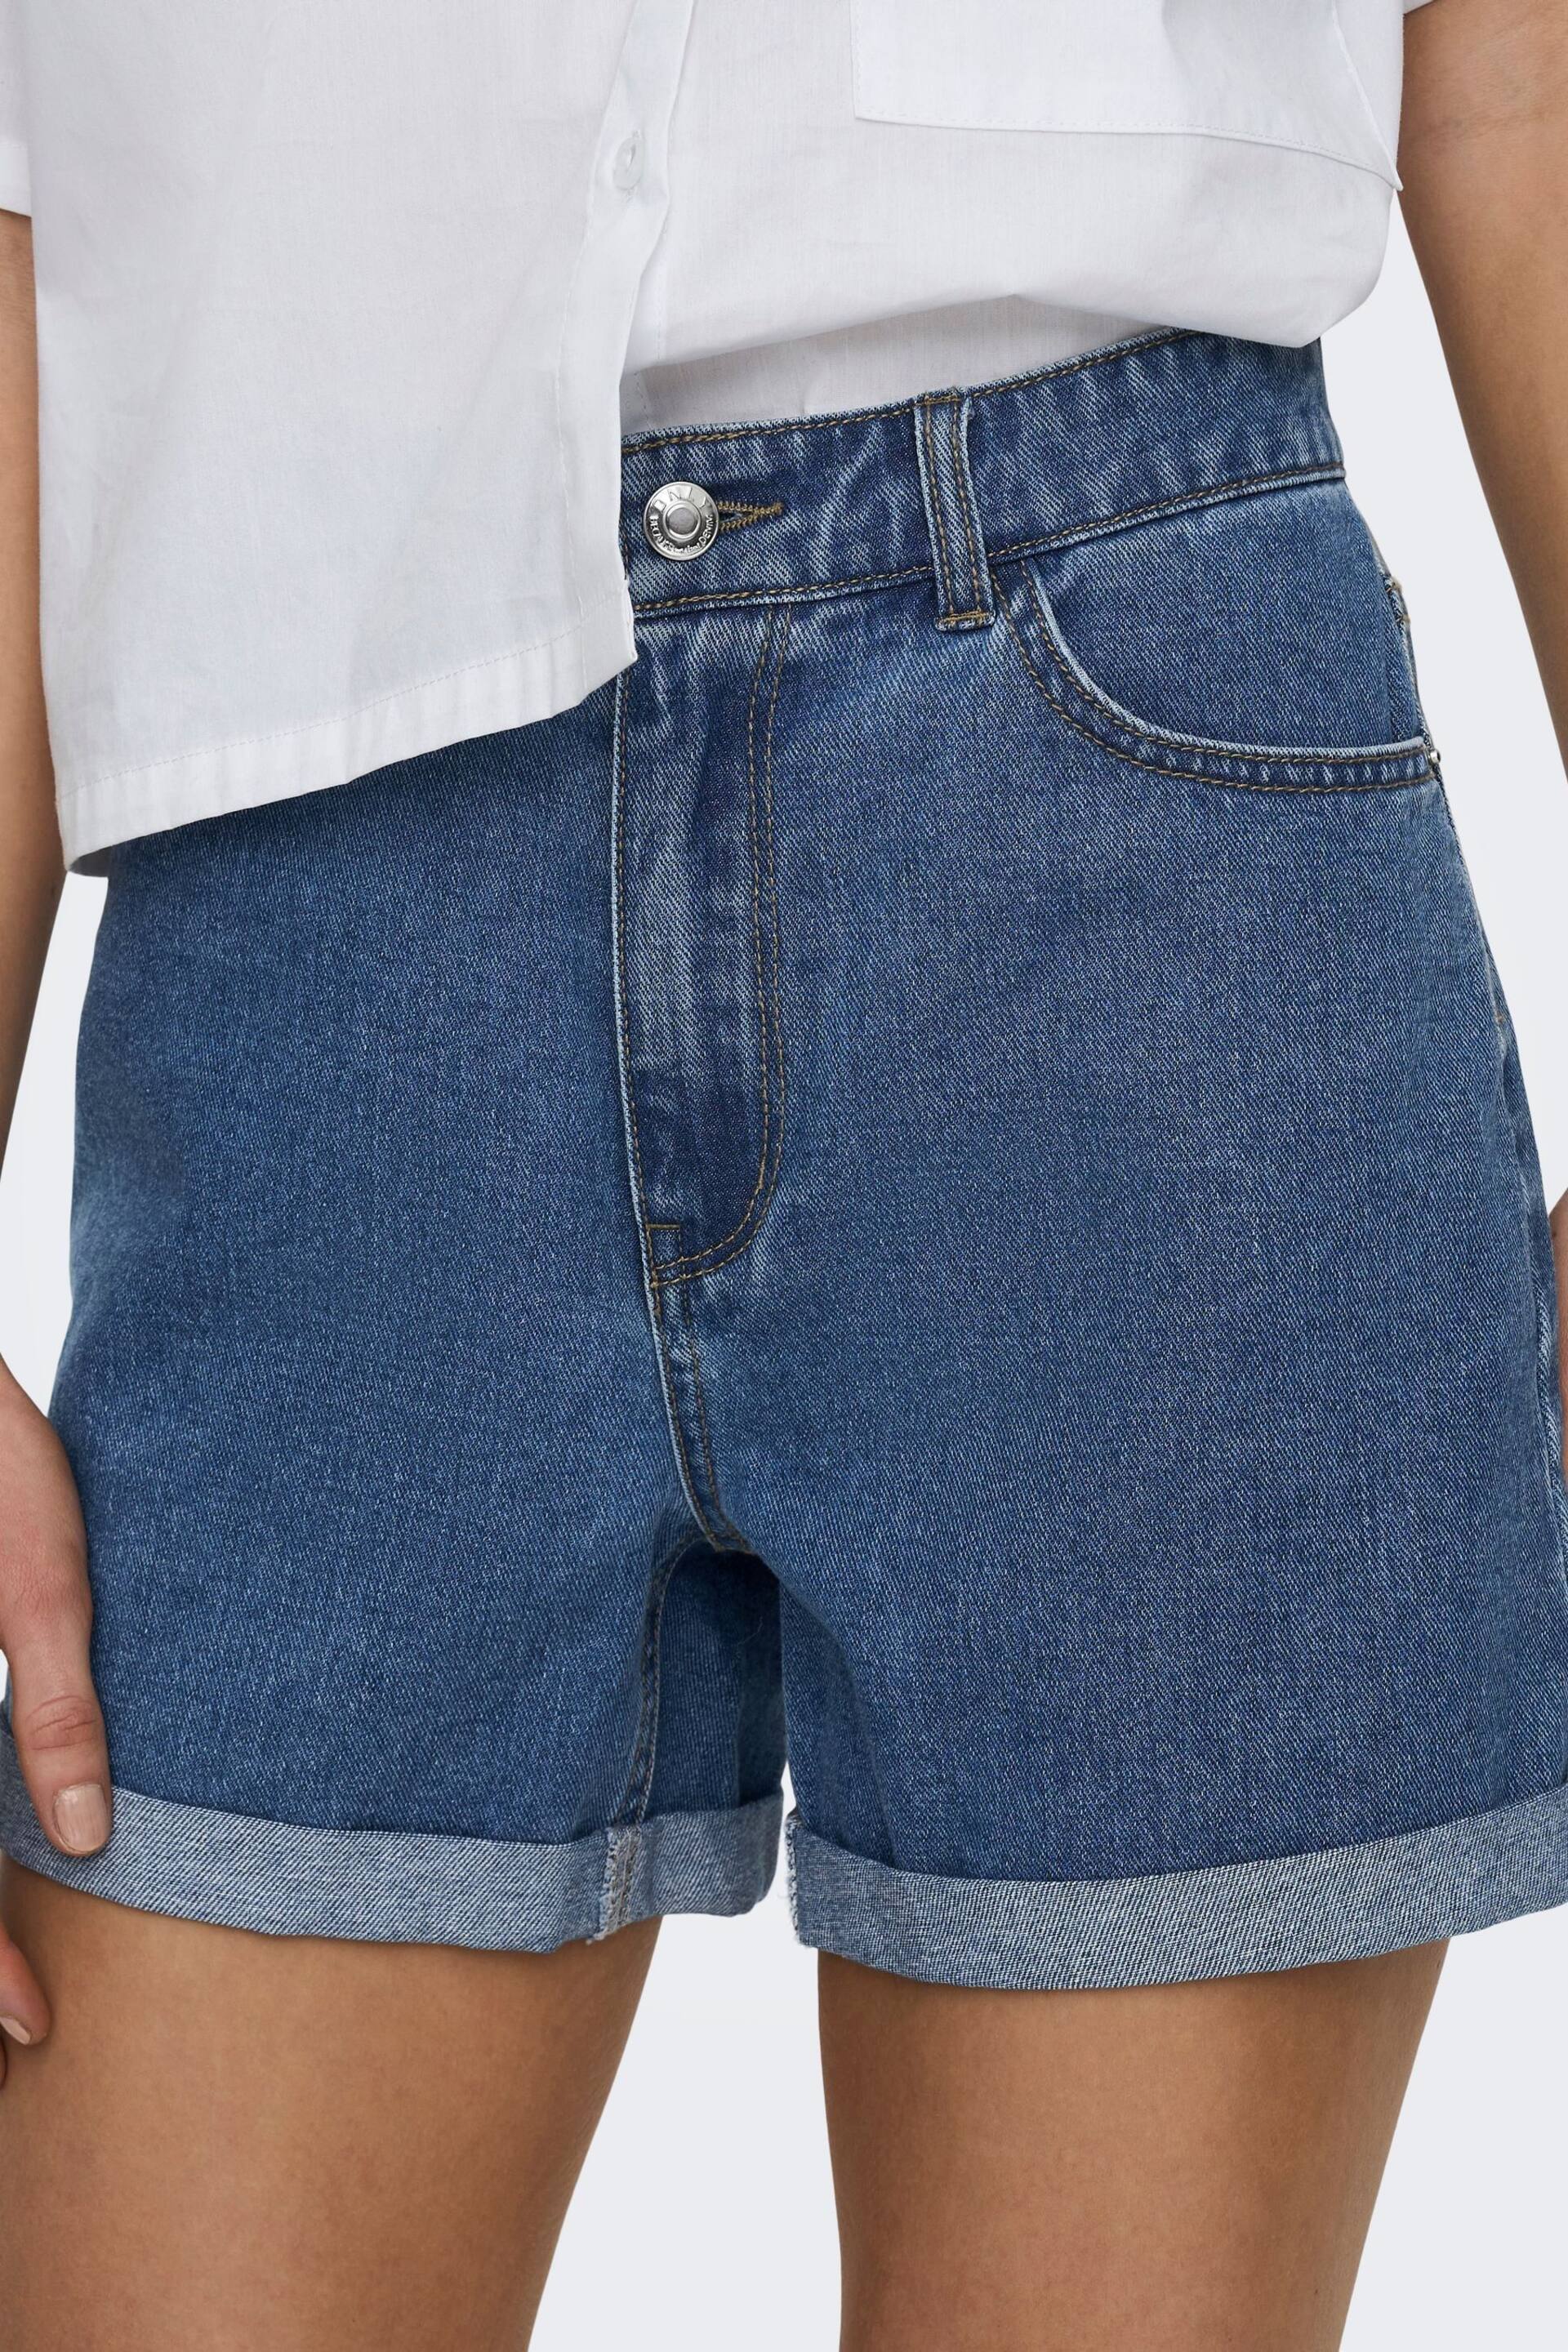 ONLY Mid Blue High Waisted Denim Mom Shorts - Image 4 of 7